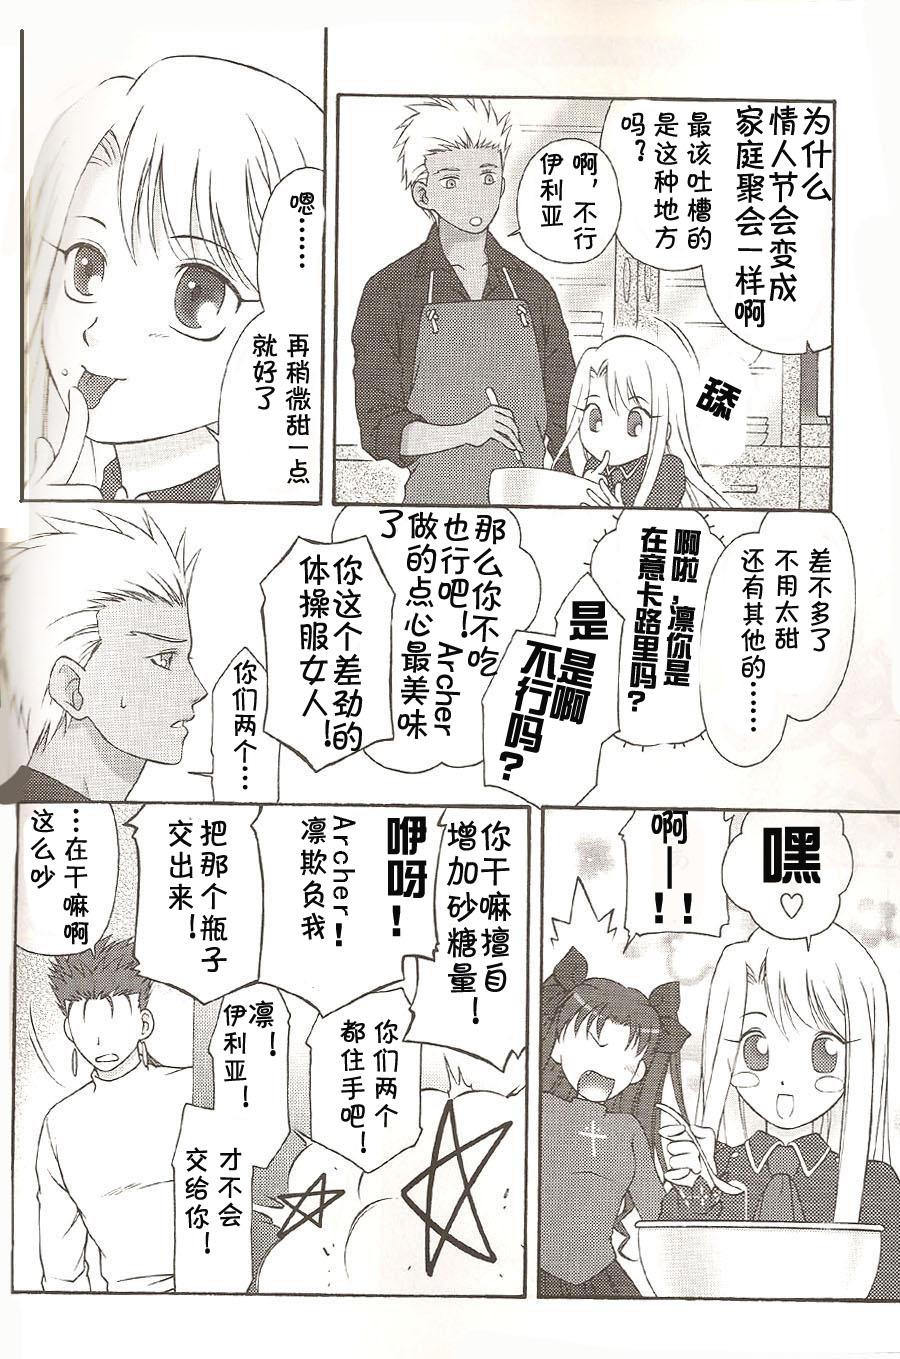 Stretch SAIHEN - Fate stay night Fate hollow ataraxia Exhibitionist - Page 9